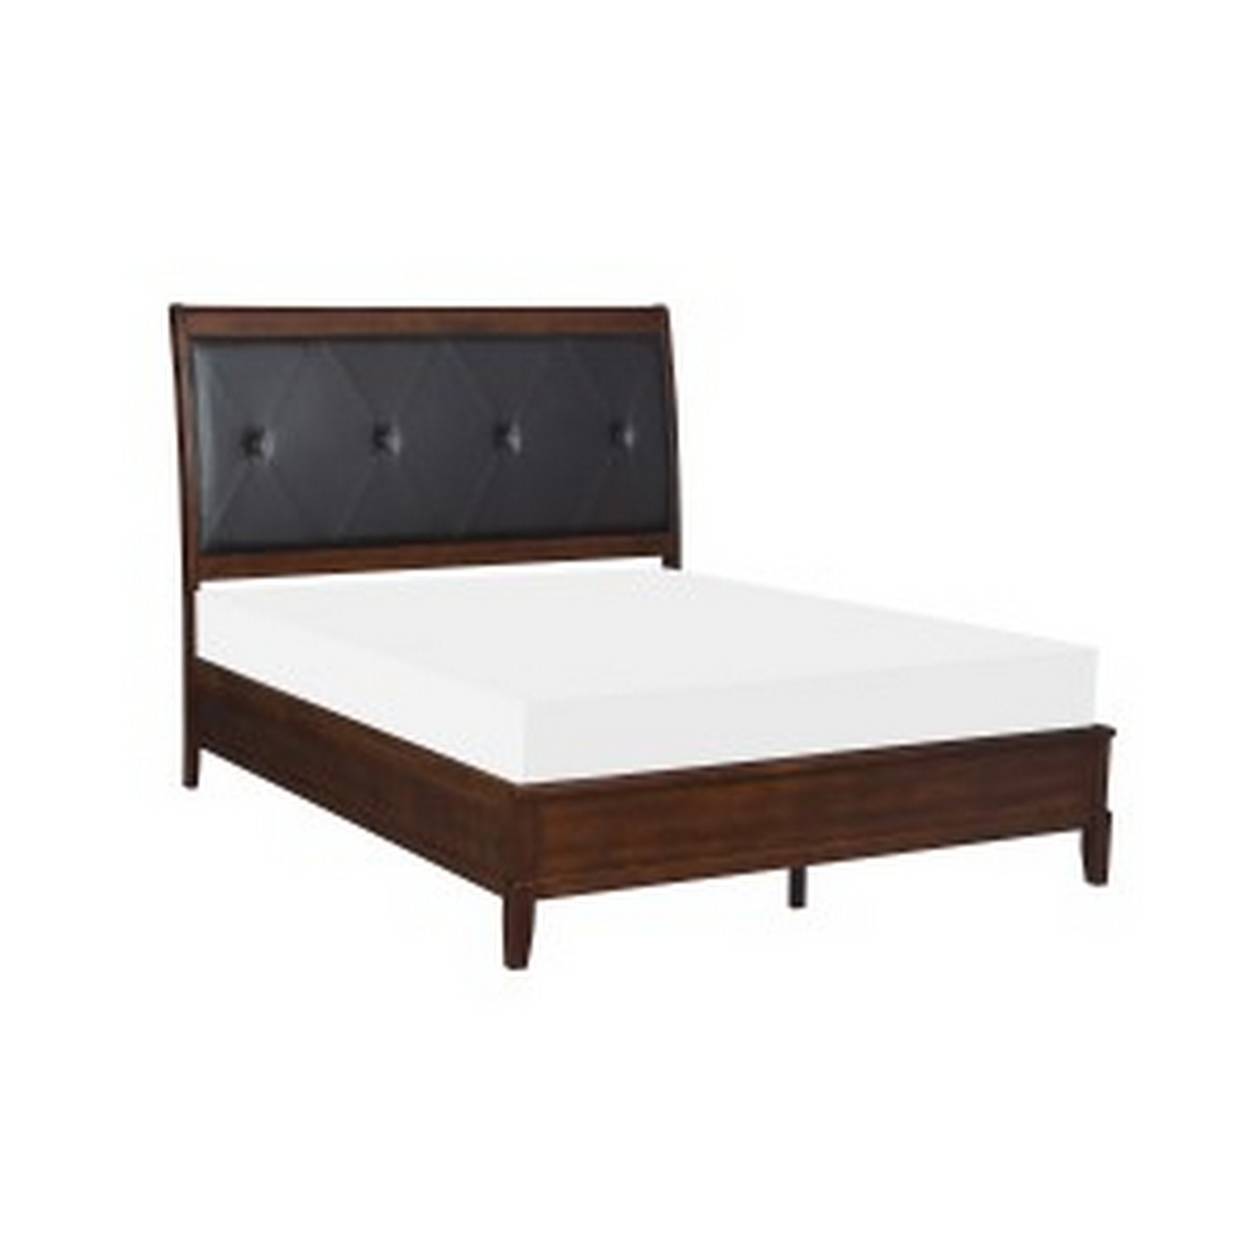 Hadly Classic Queen Sleigh Bed, Button Tufted Headboard, Black Faux Leather- Saltoro Sherpi